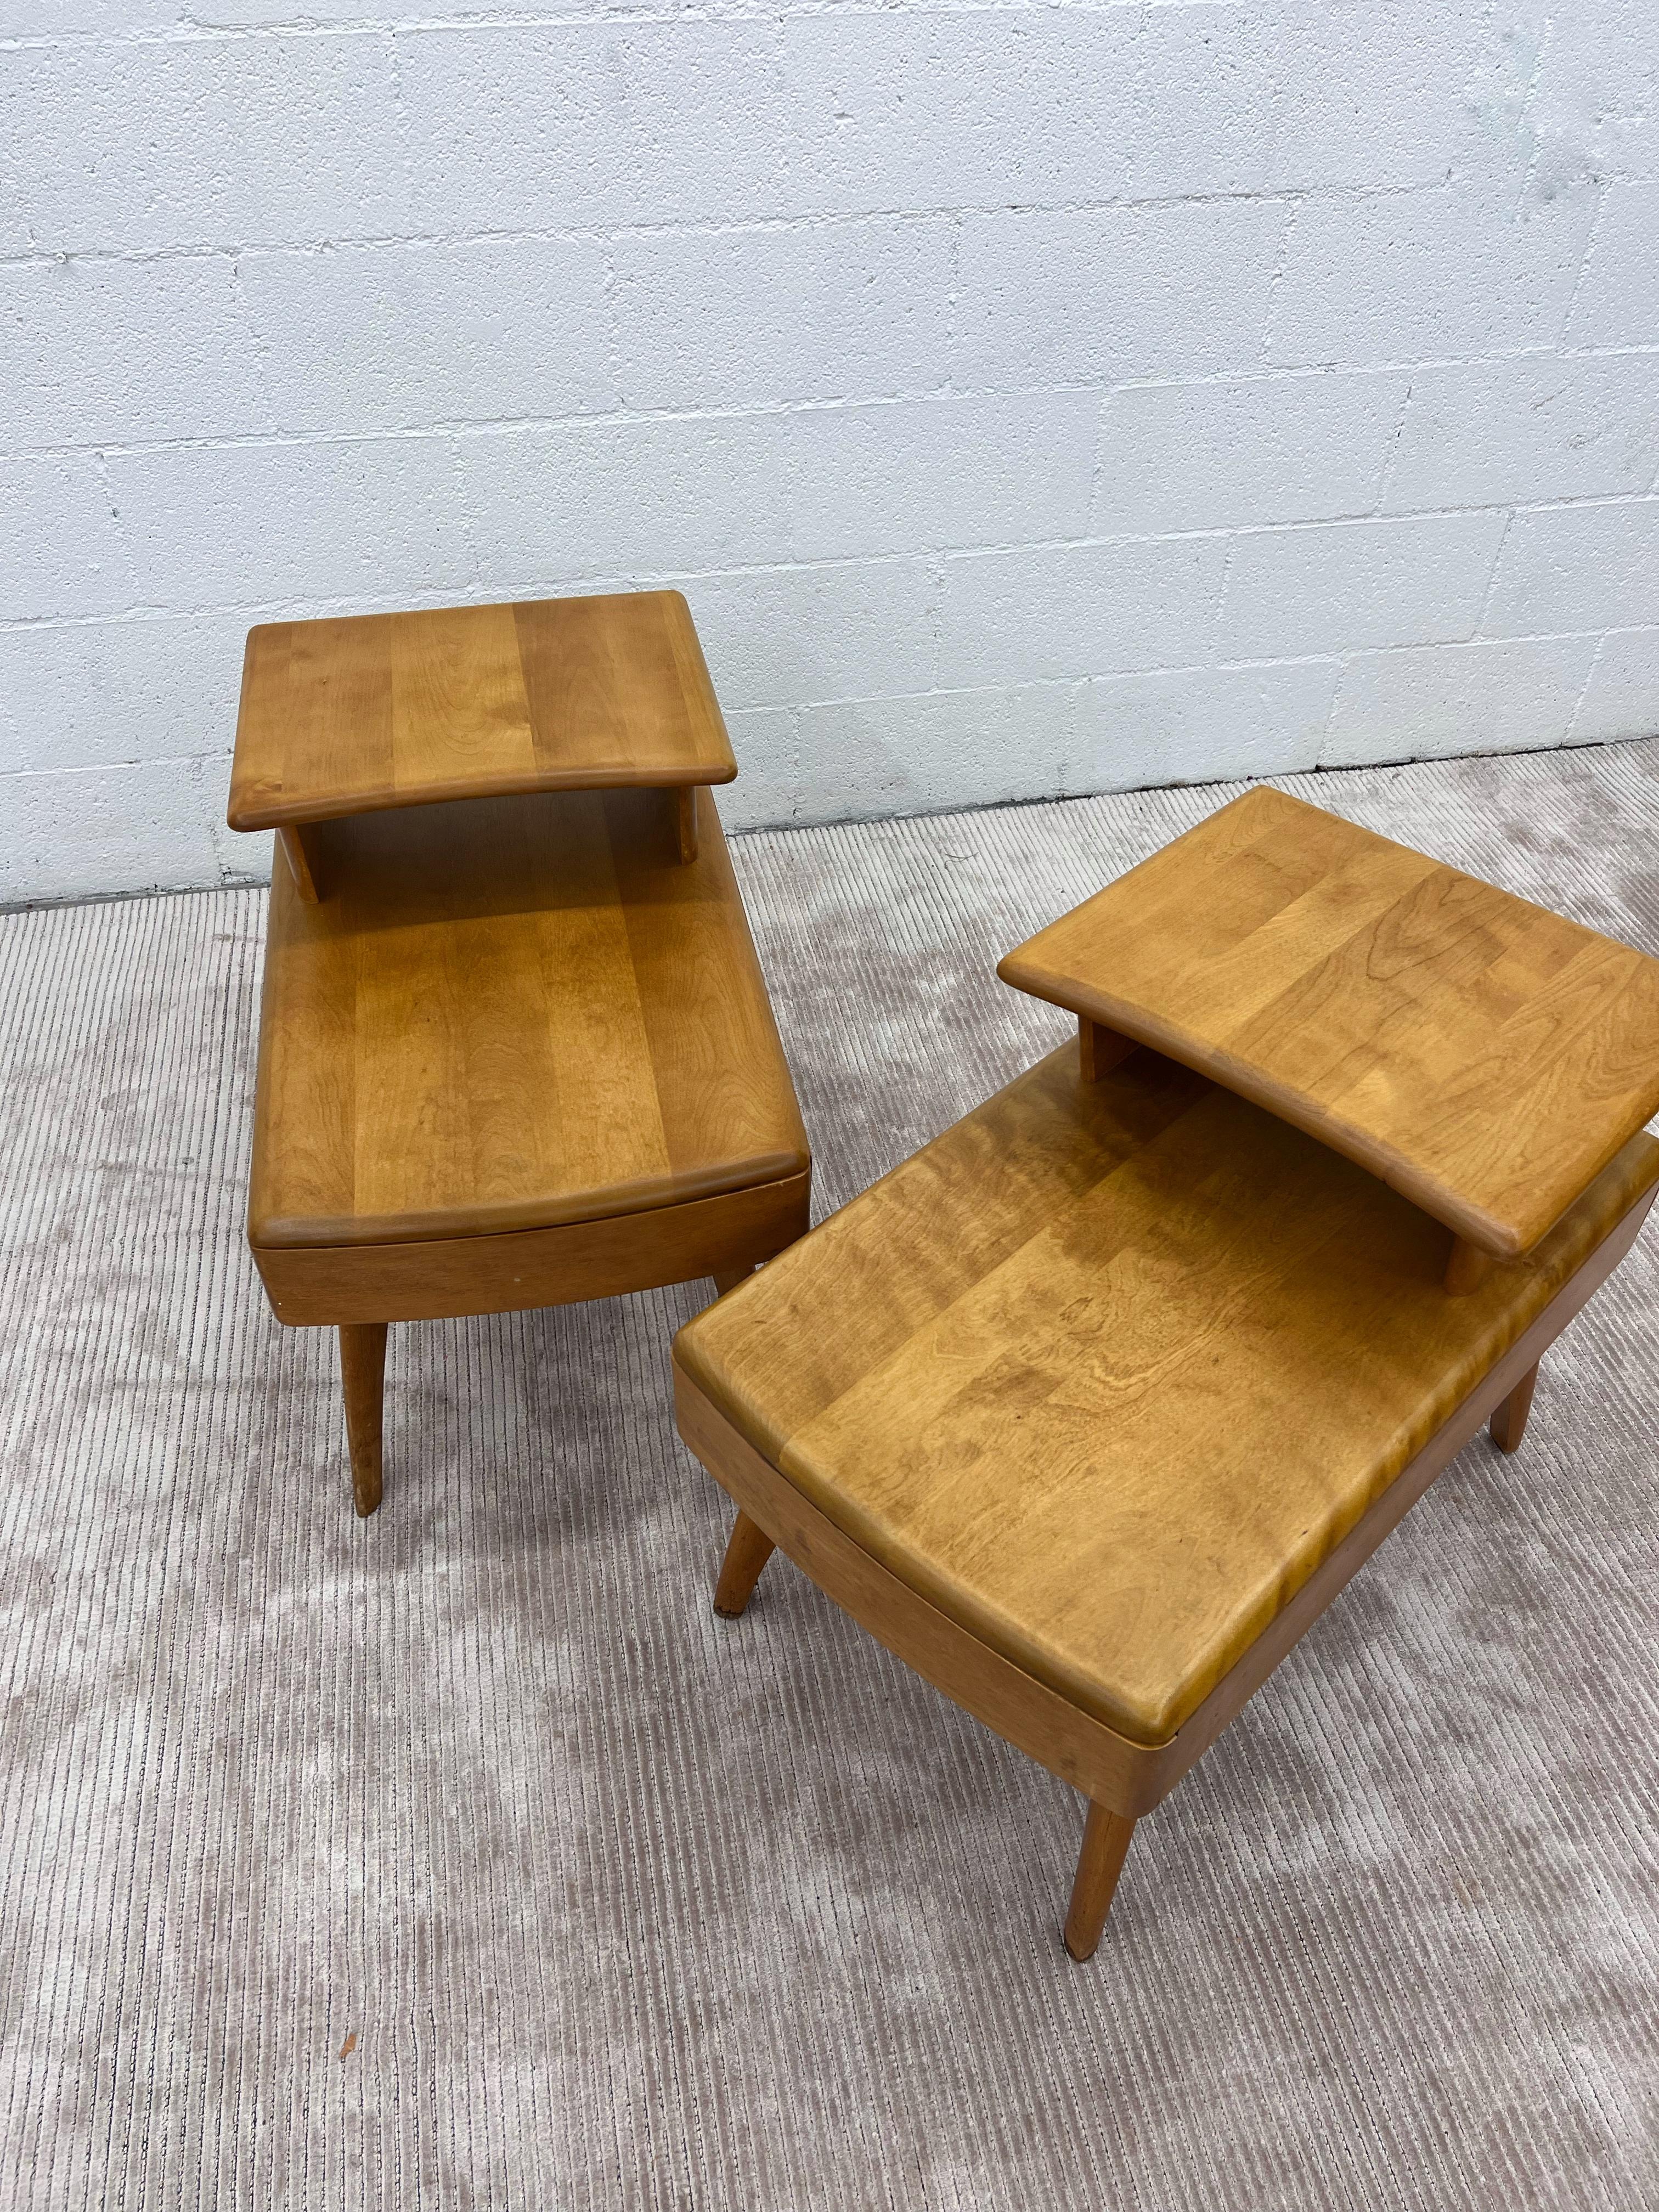 Birch Vintage Heywood Wakefield Mid Century modern 2 Tier Side Table with Drawer For Sale